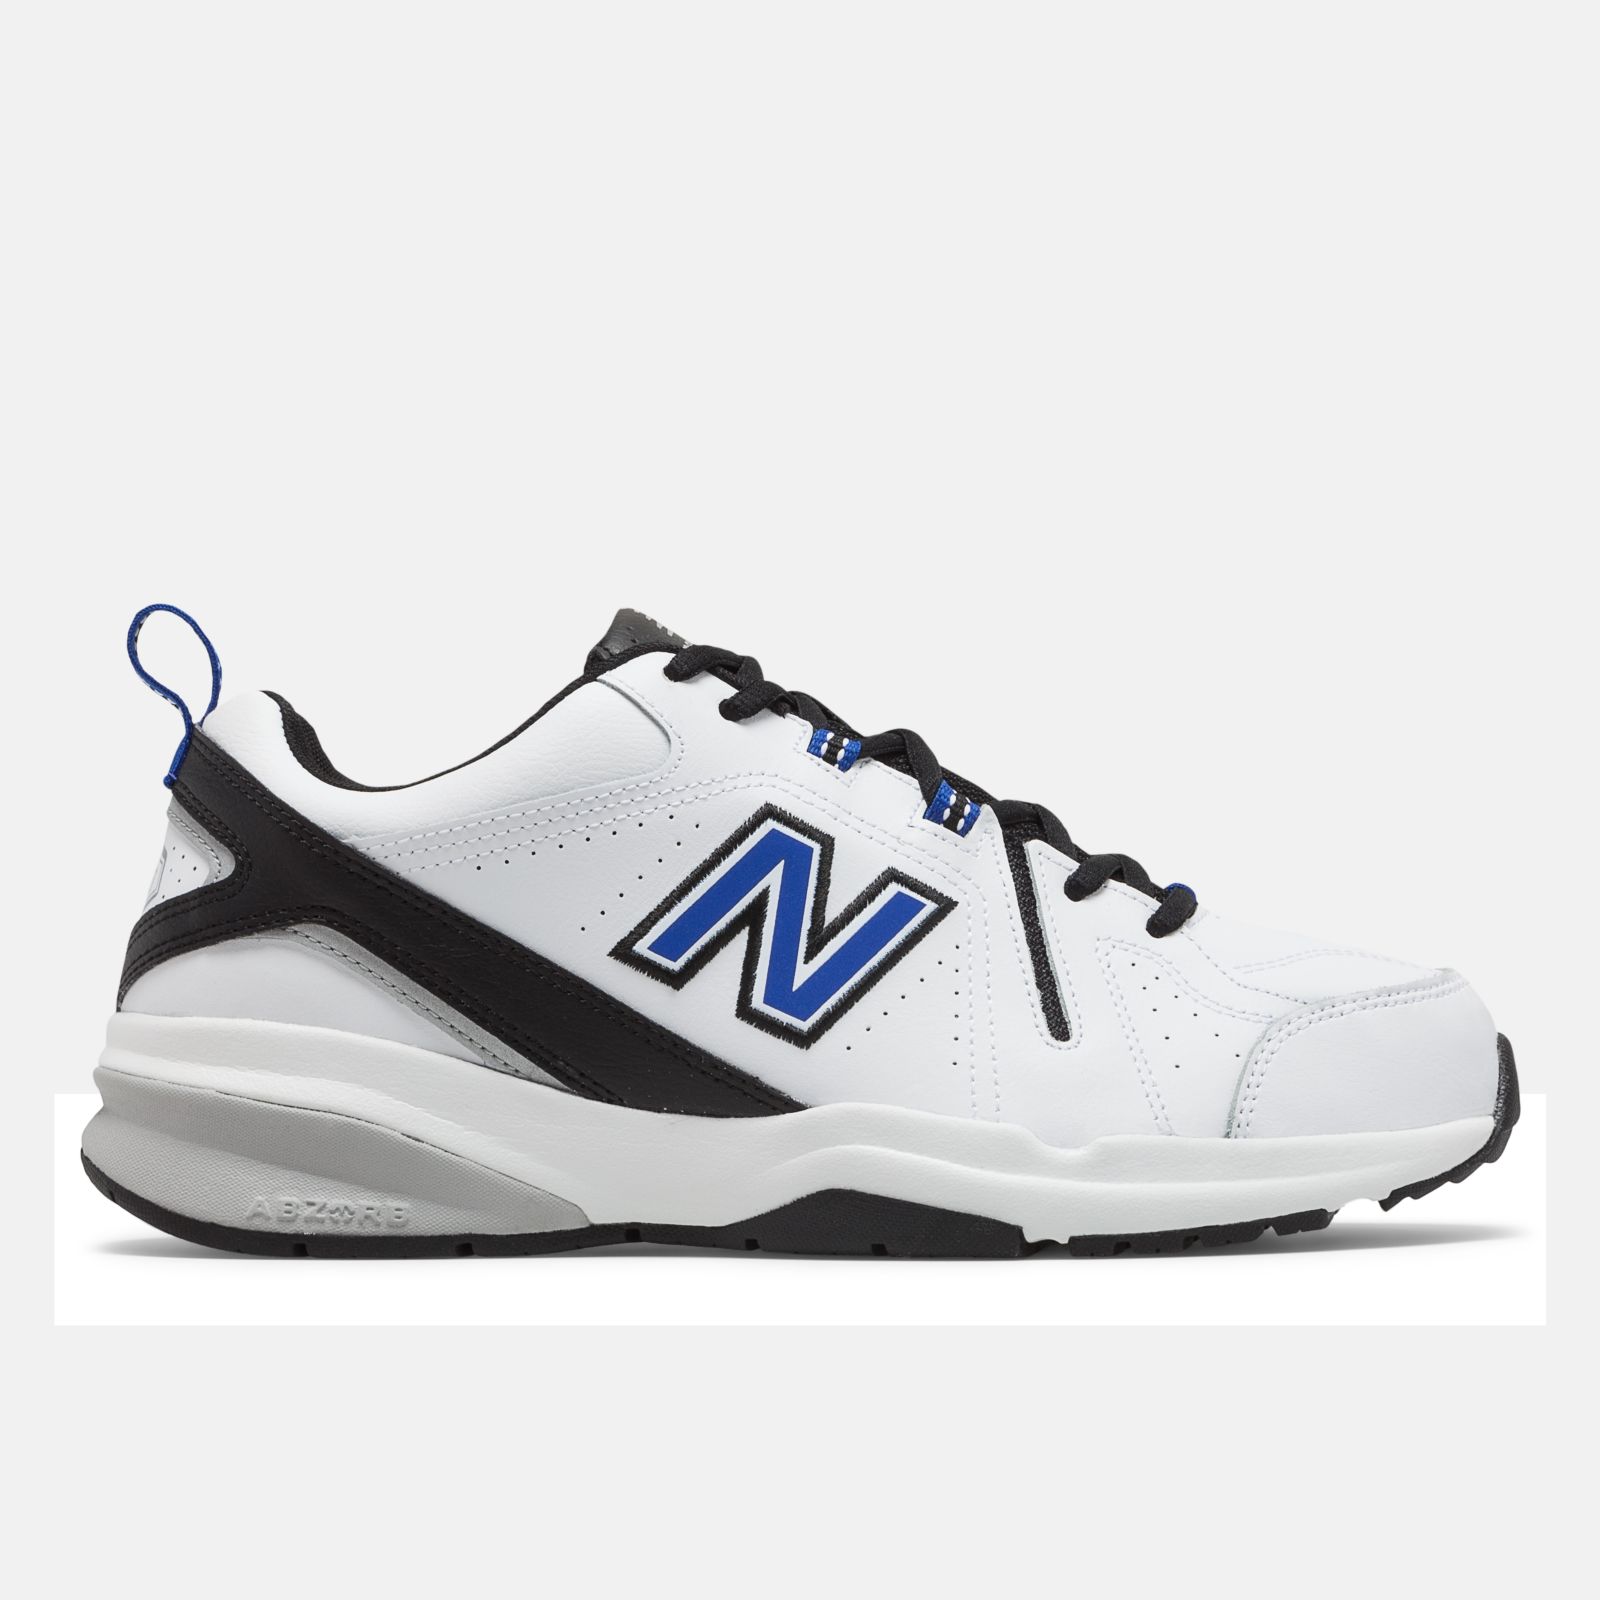 He may be flashy, but boy does he back it up. New Balance's NEW FuelCe, New Balance Shoe